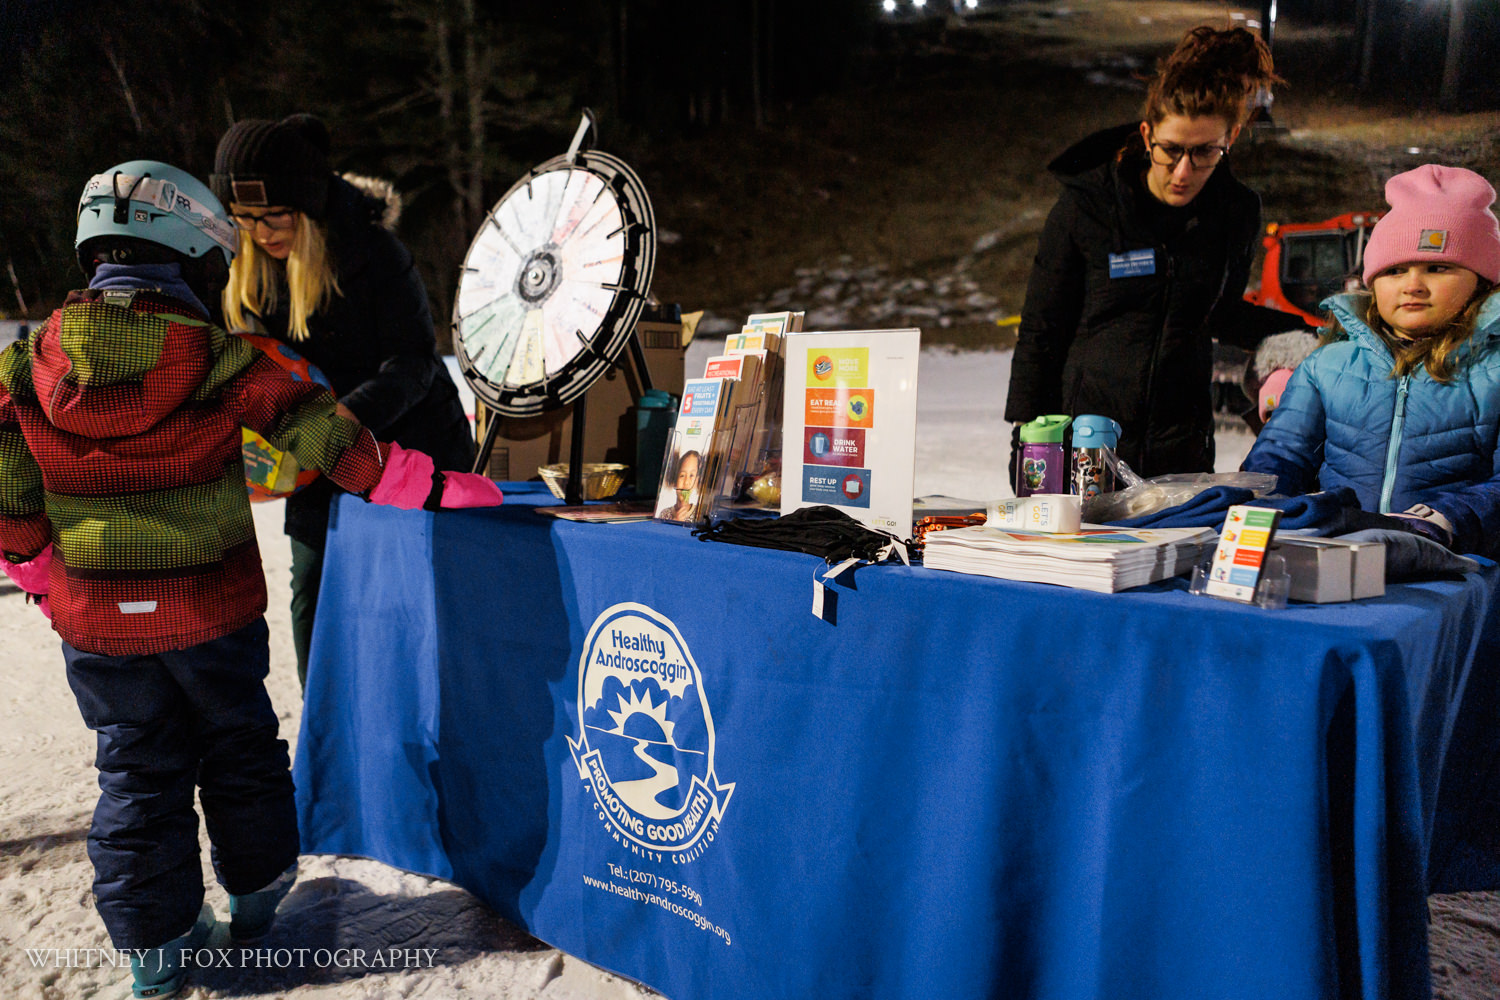 184 winter kids welcome to winter 2022 lost valley auburn maine documentary event photographer whitney j fox 3071 w